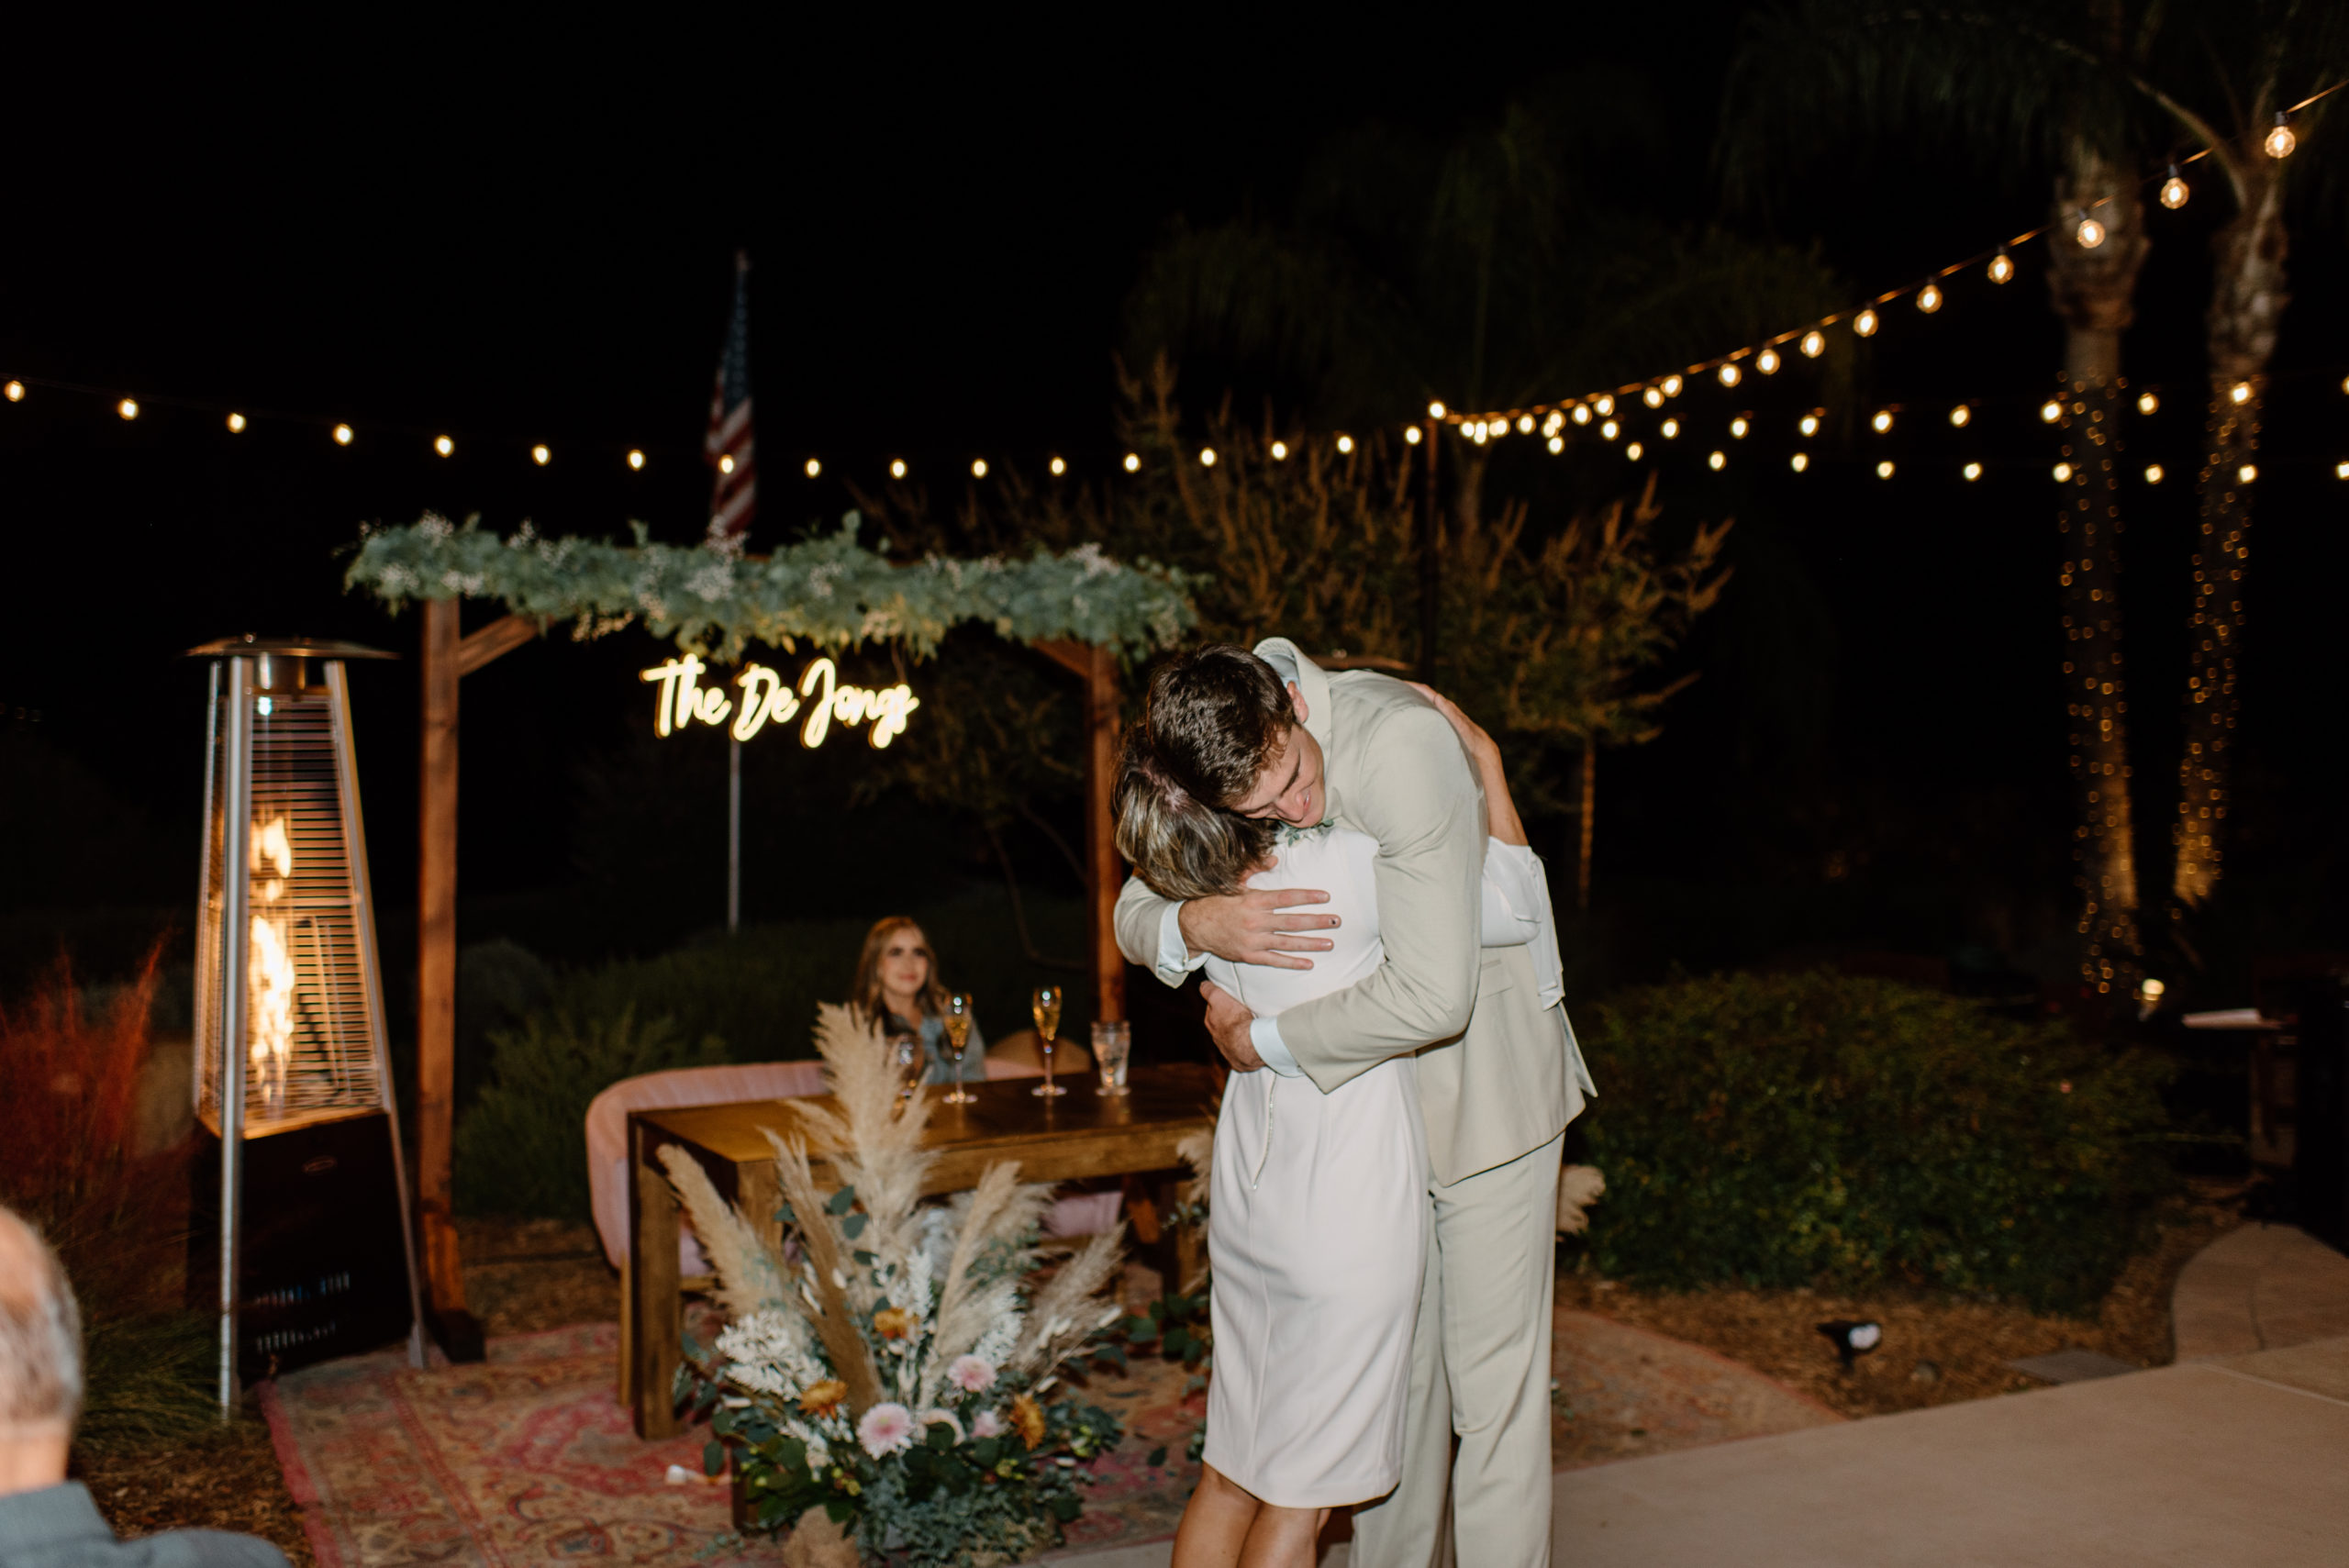 The groom and his mom sharing a hug during the wedding reception 